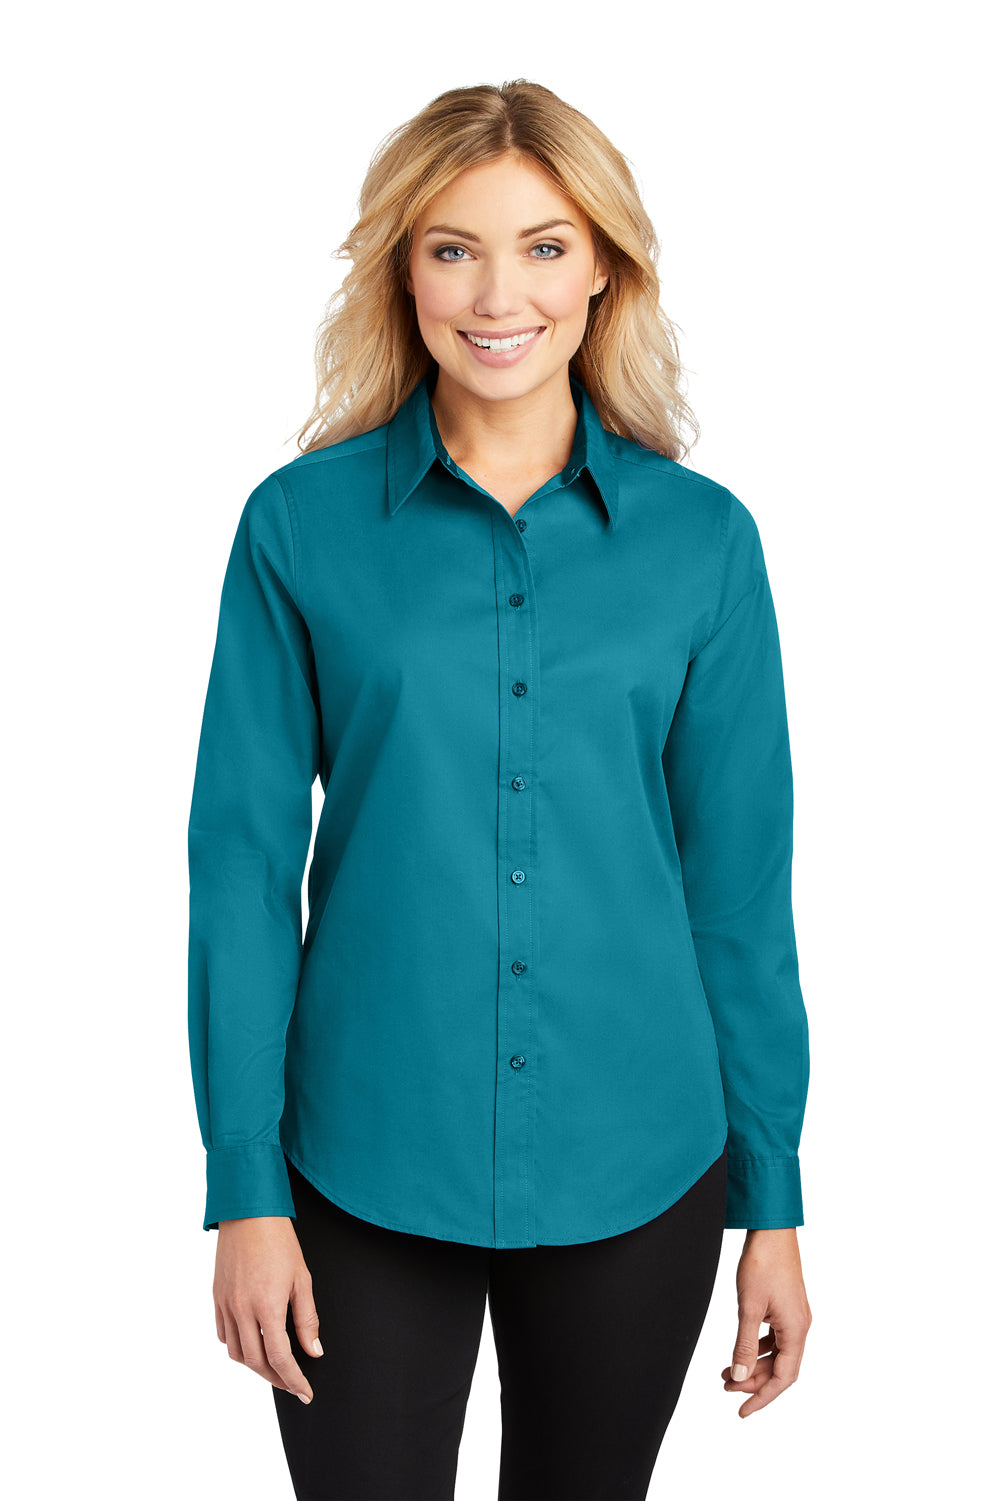 Port Authority L608 Womens Easy Care Wrinkle Resistant Long Sleeve Button Down Shirt Teal Green Front